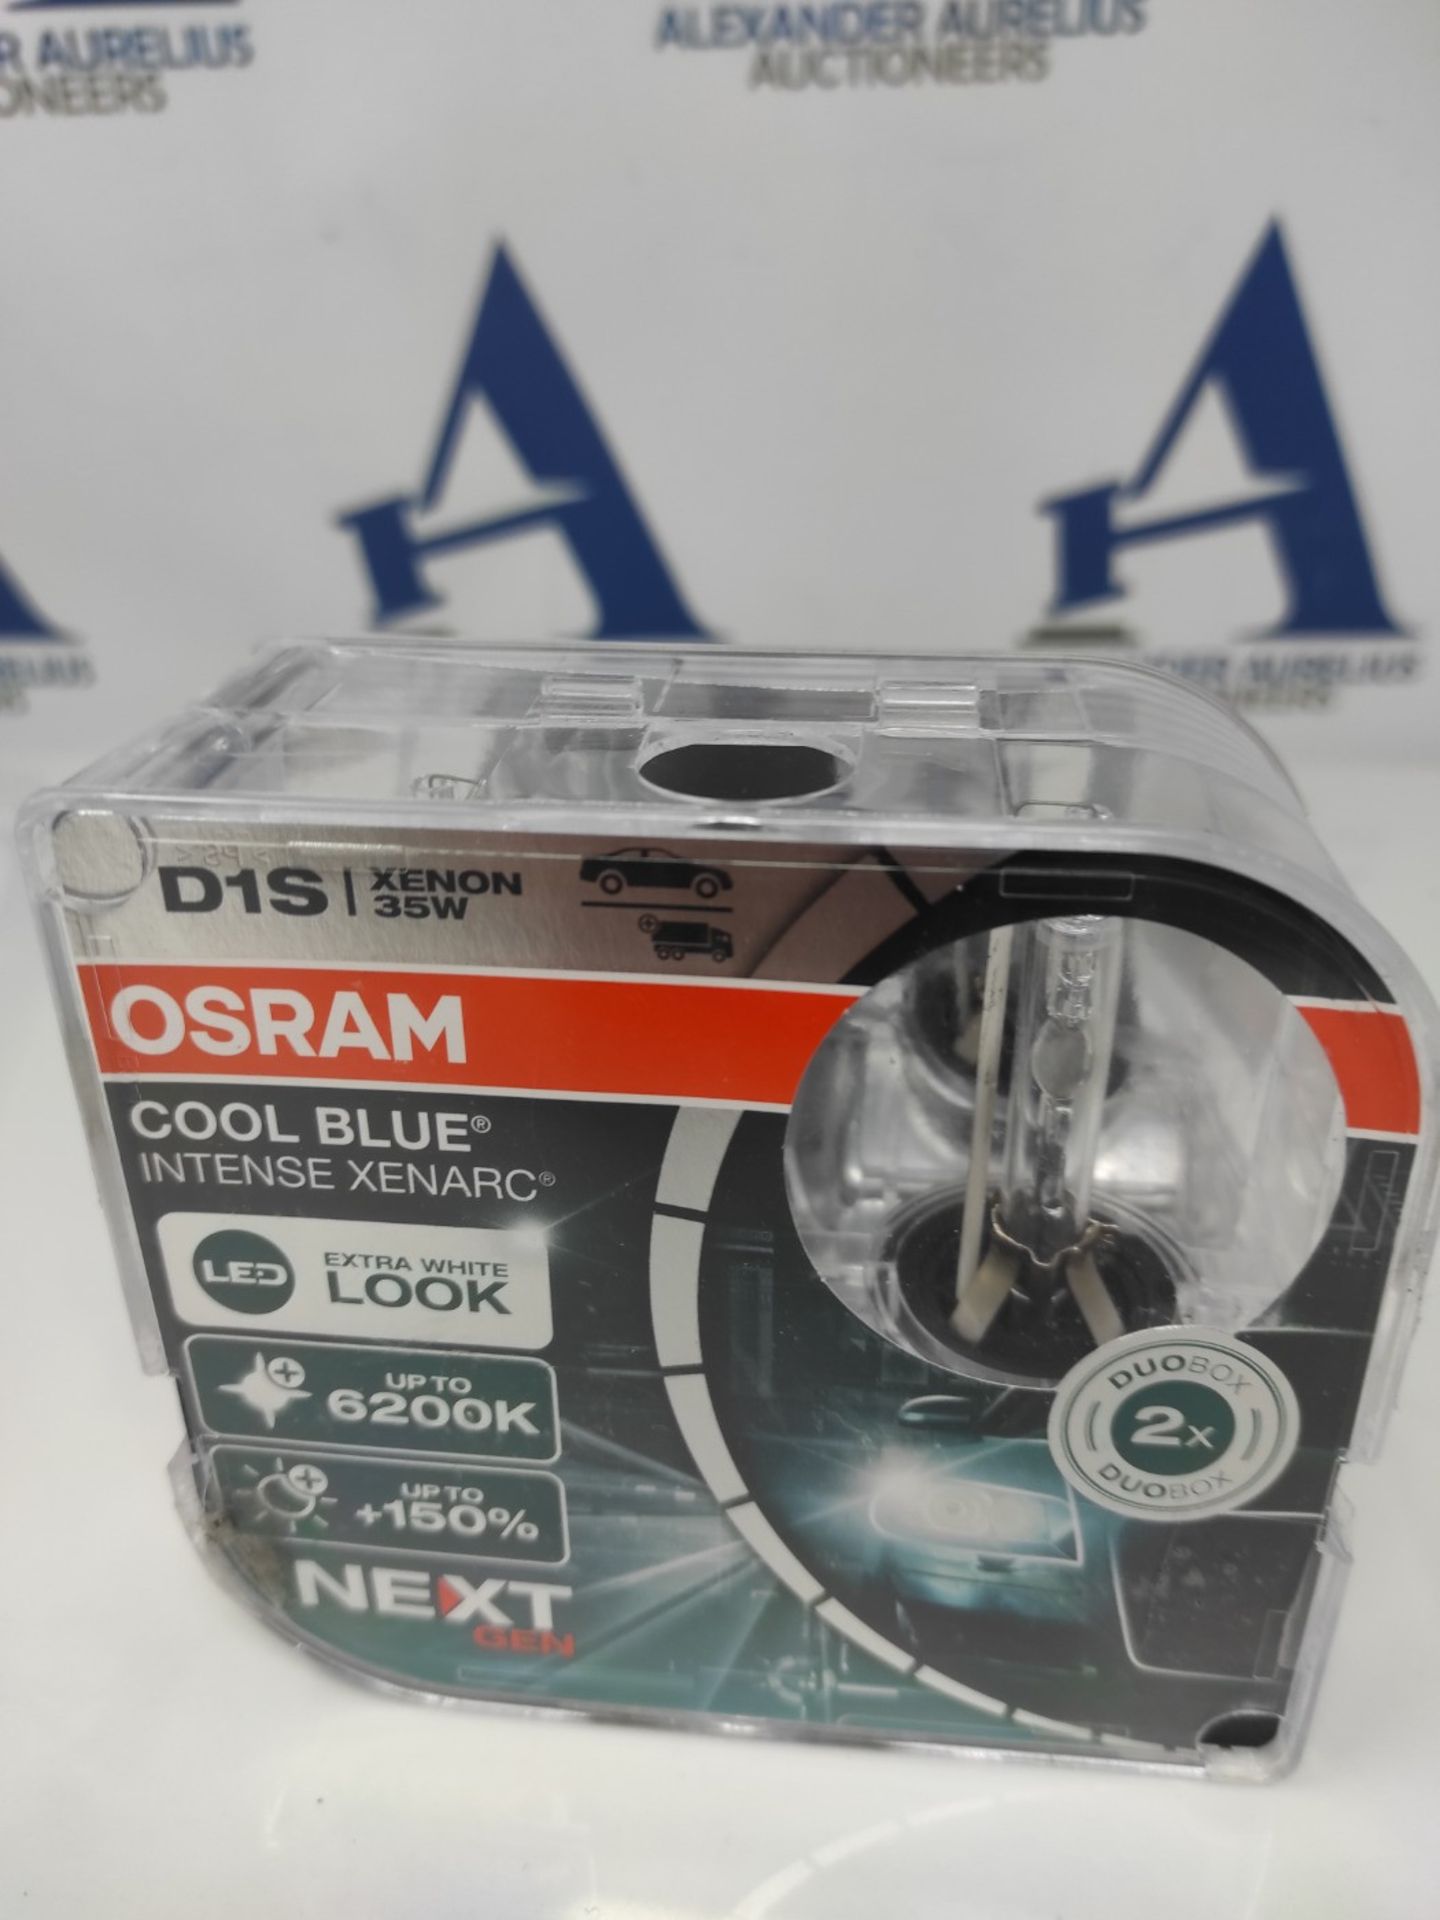 RRP £109.00 OSRAM XENARC COOL BLUE INTENSE D1S, +150% more brightness, up to 6,200K, xenon headlig - Image 2 of 2